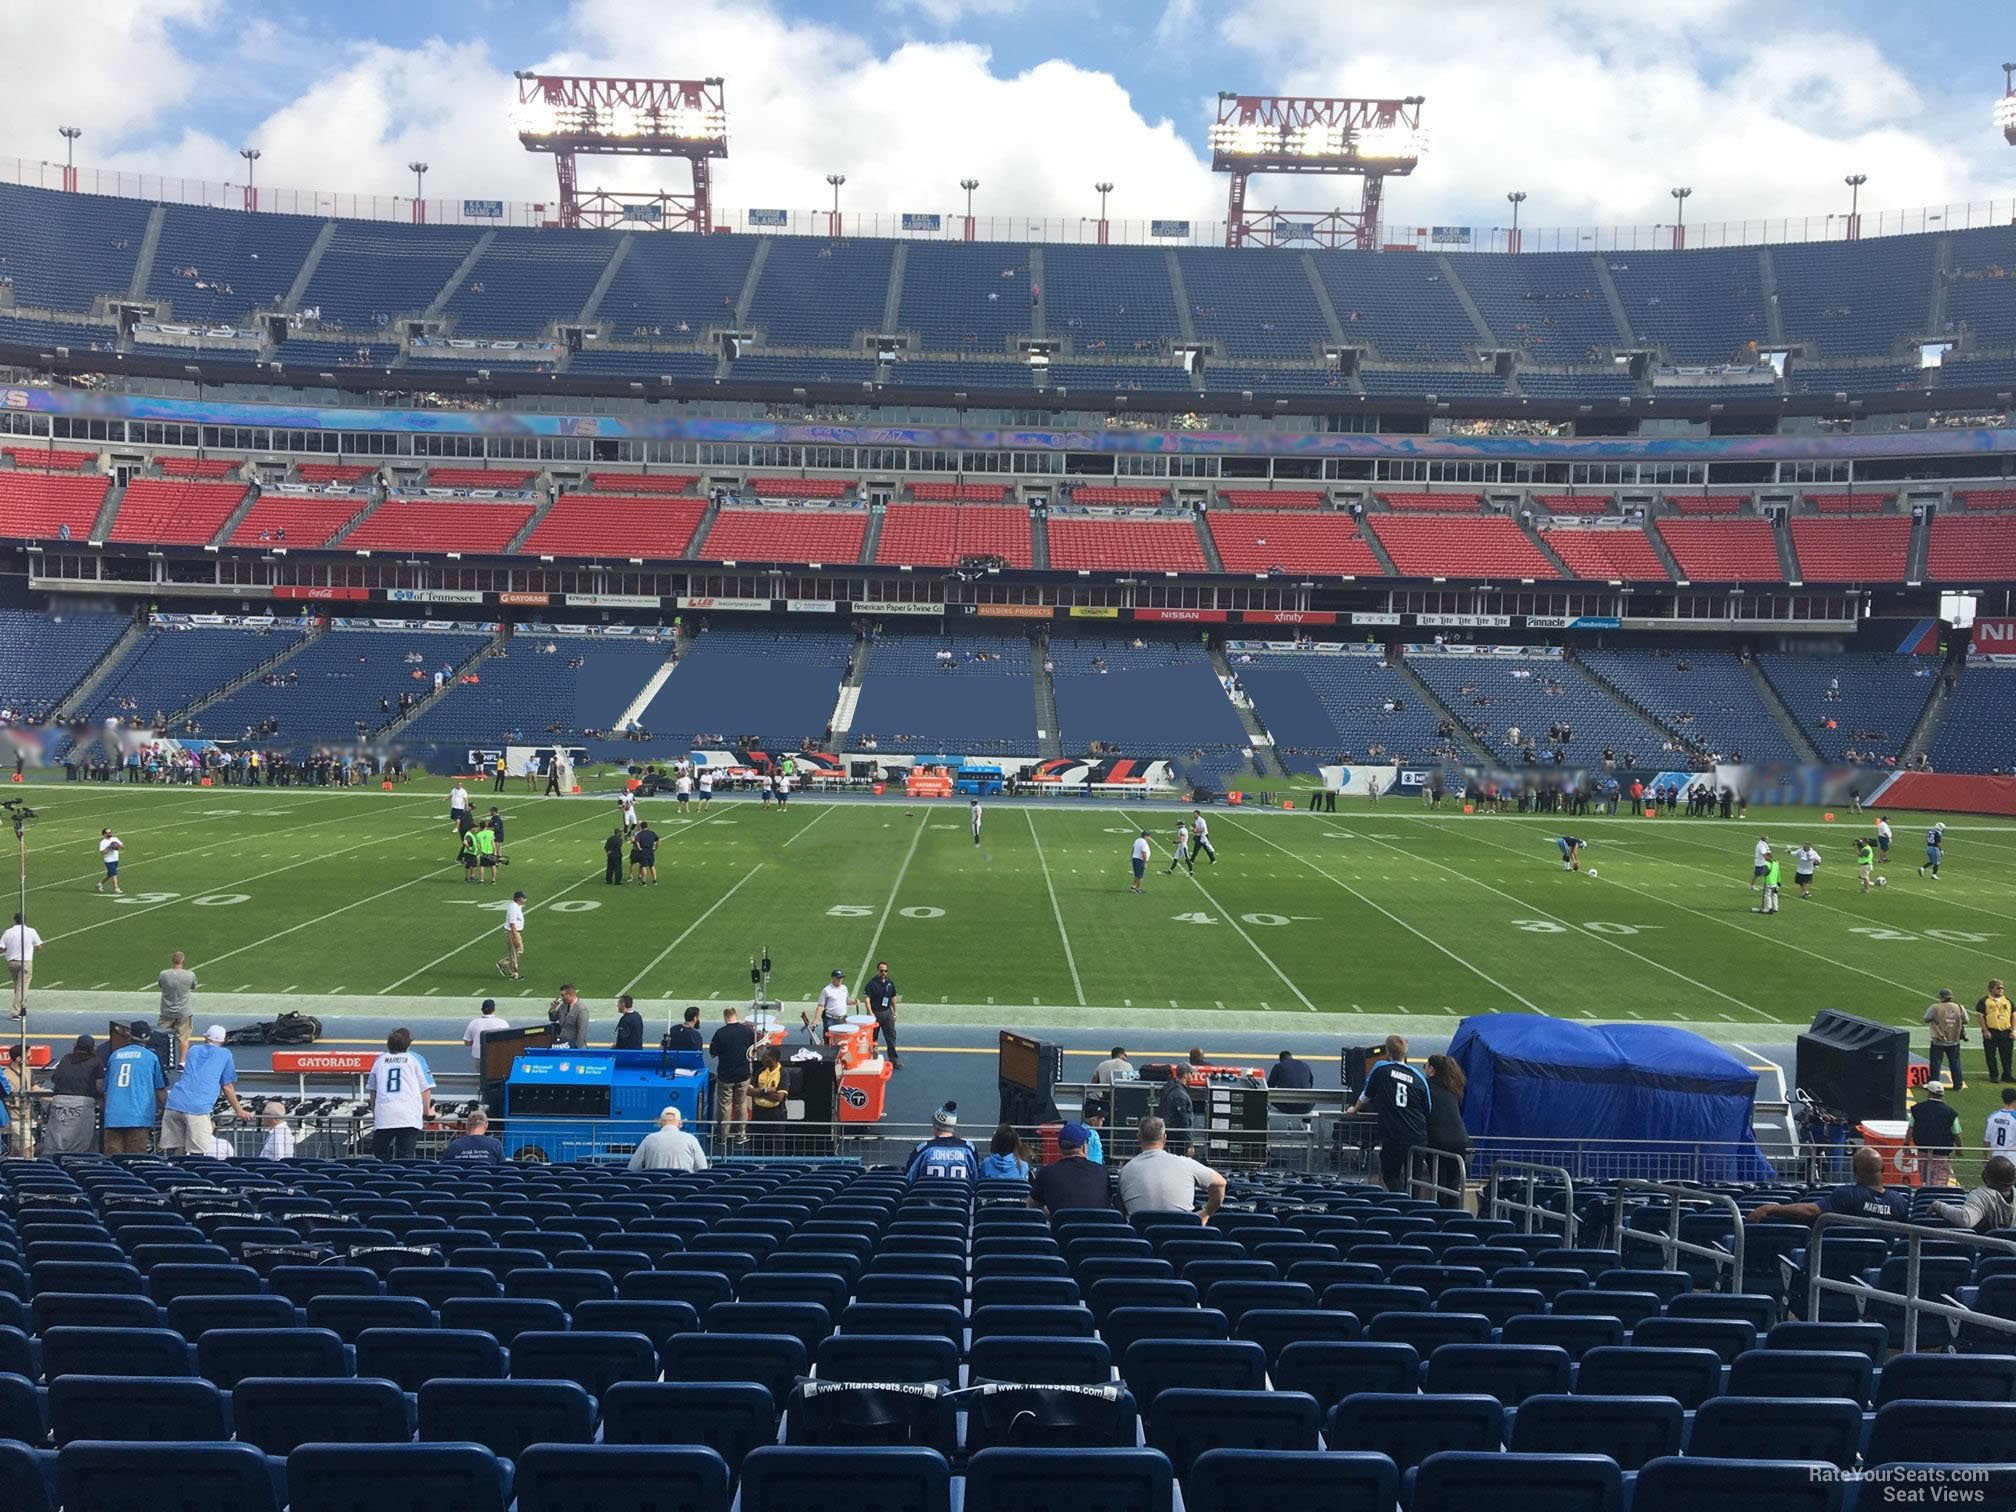 section 135, row aa seat view  for football - nissan stadium